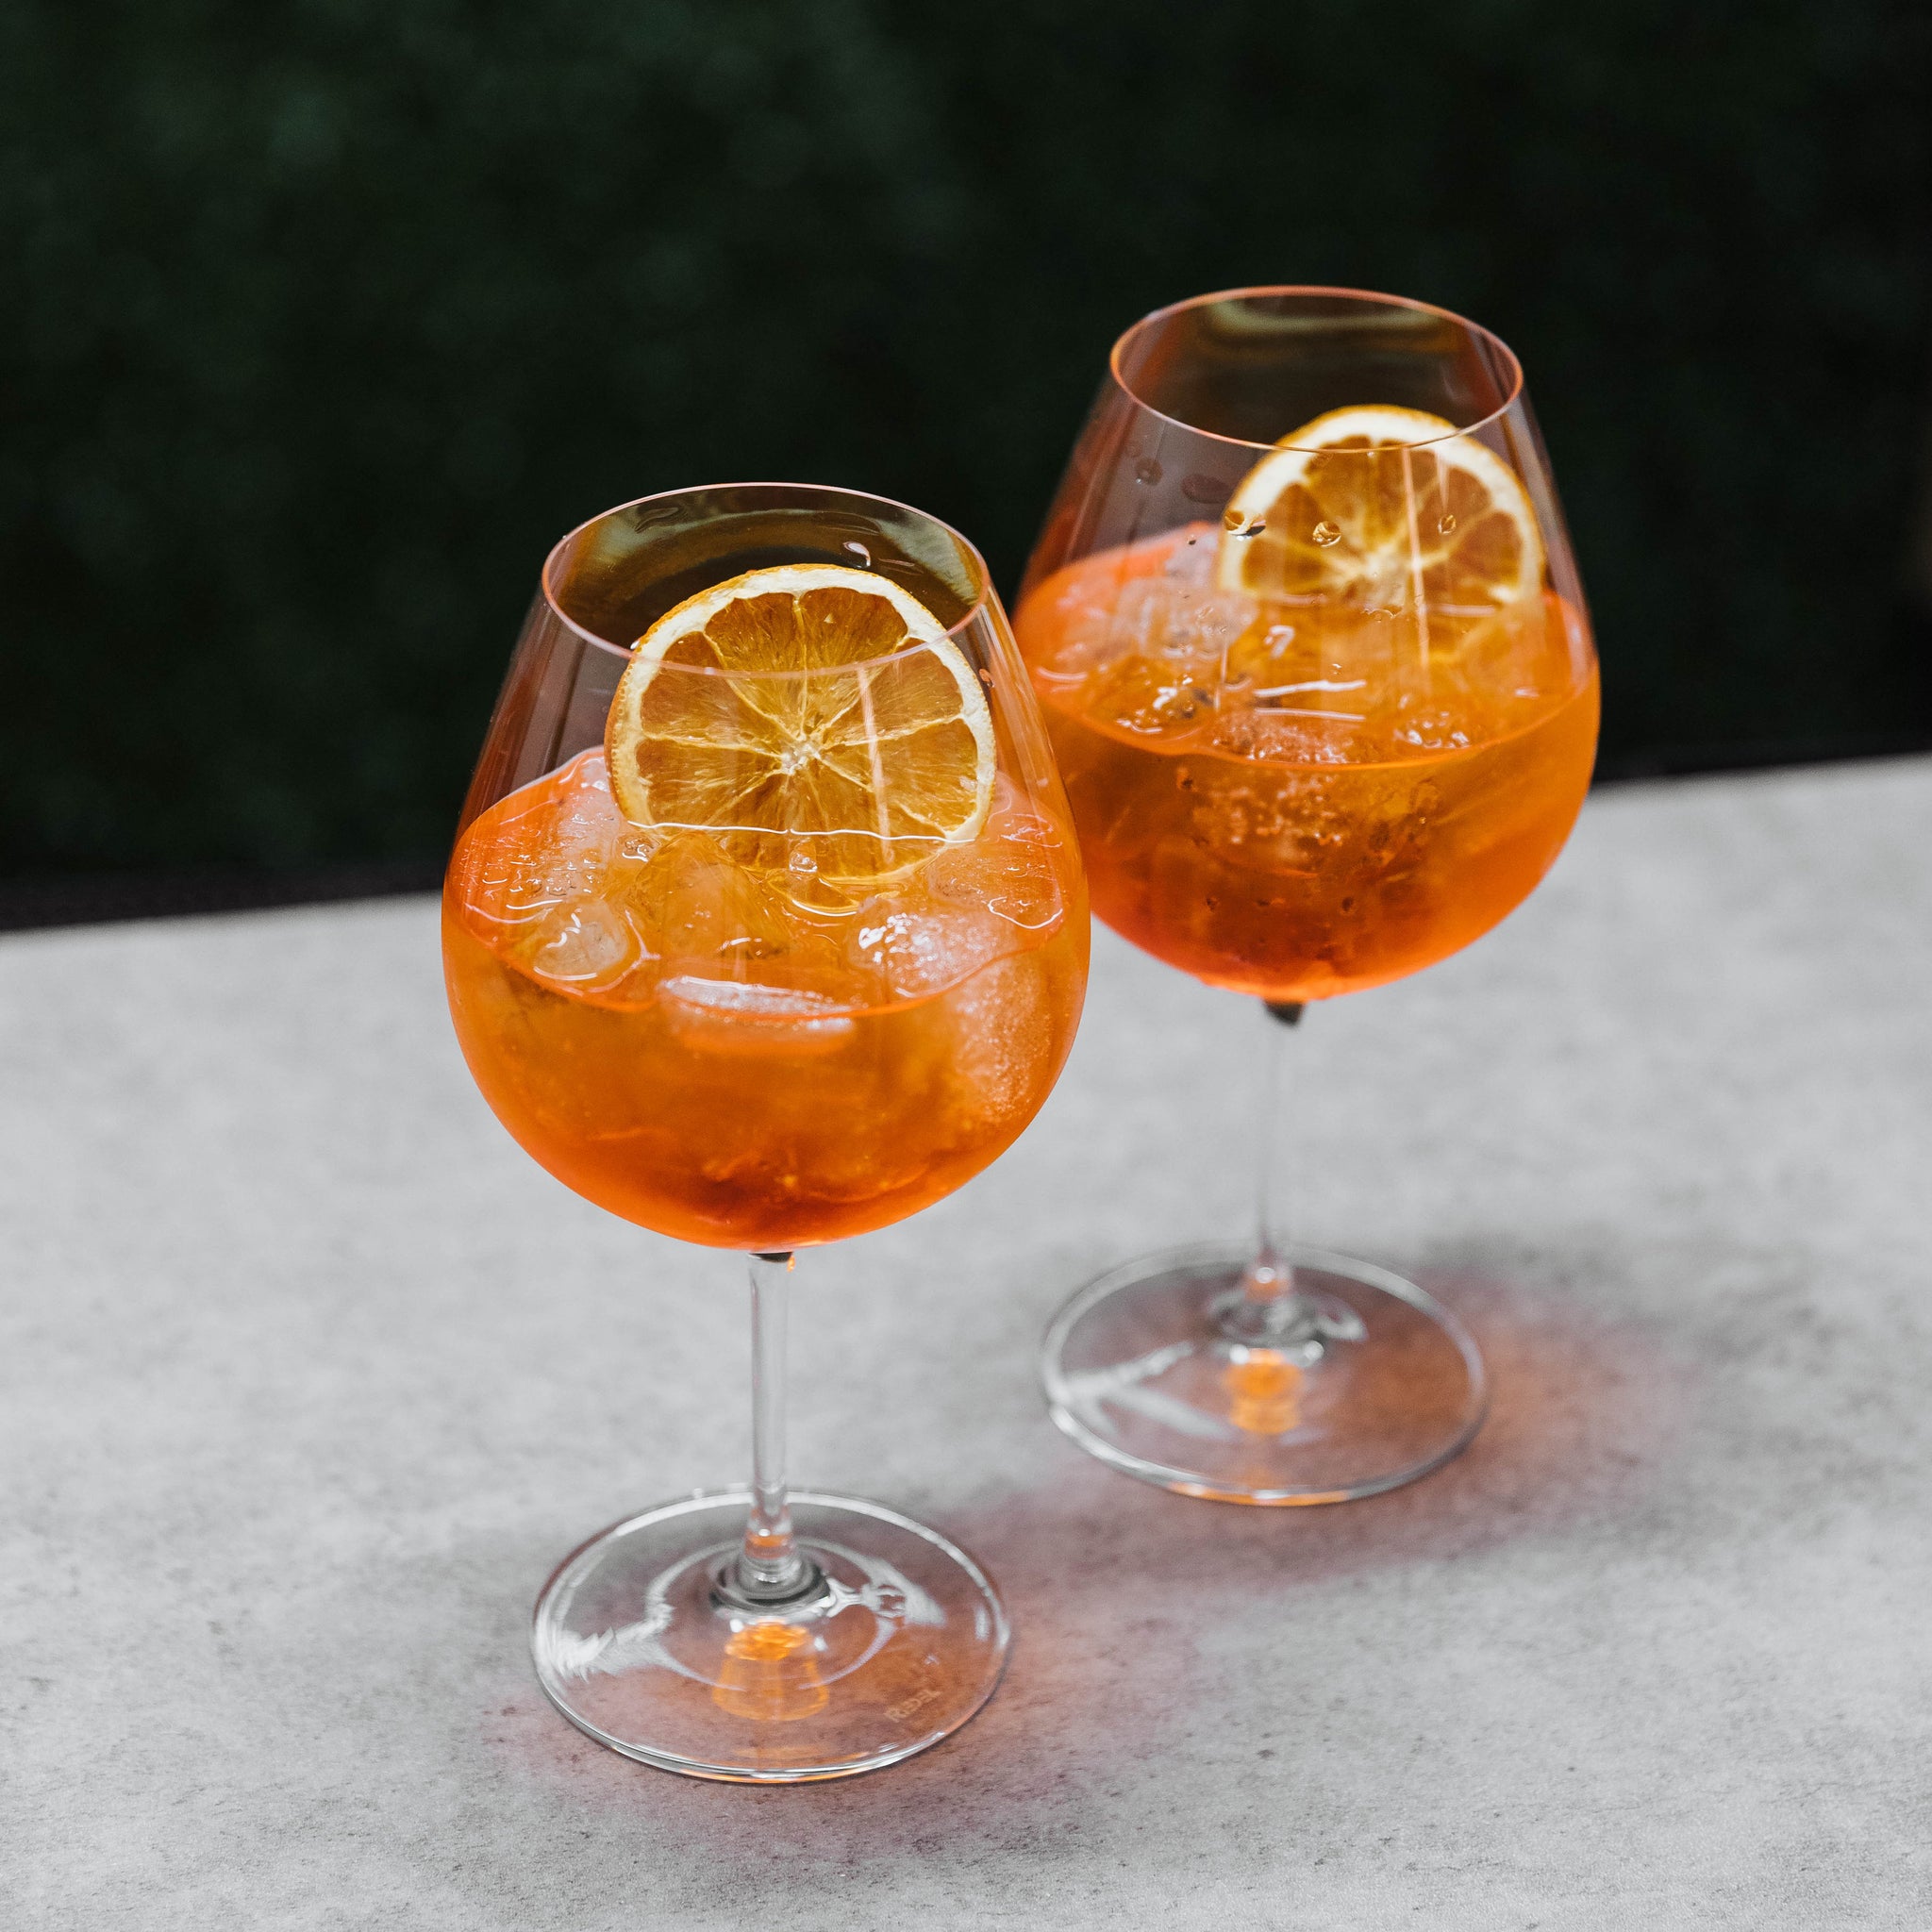 Aperol Spritz & French 75 Box – The Mixologer